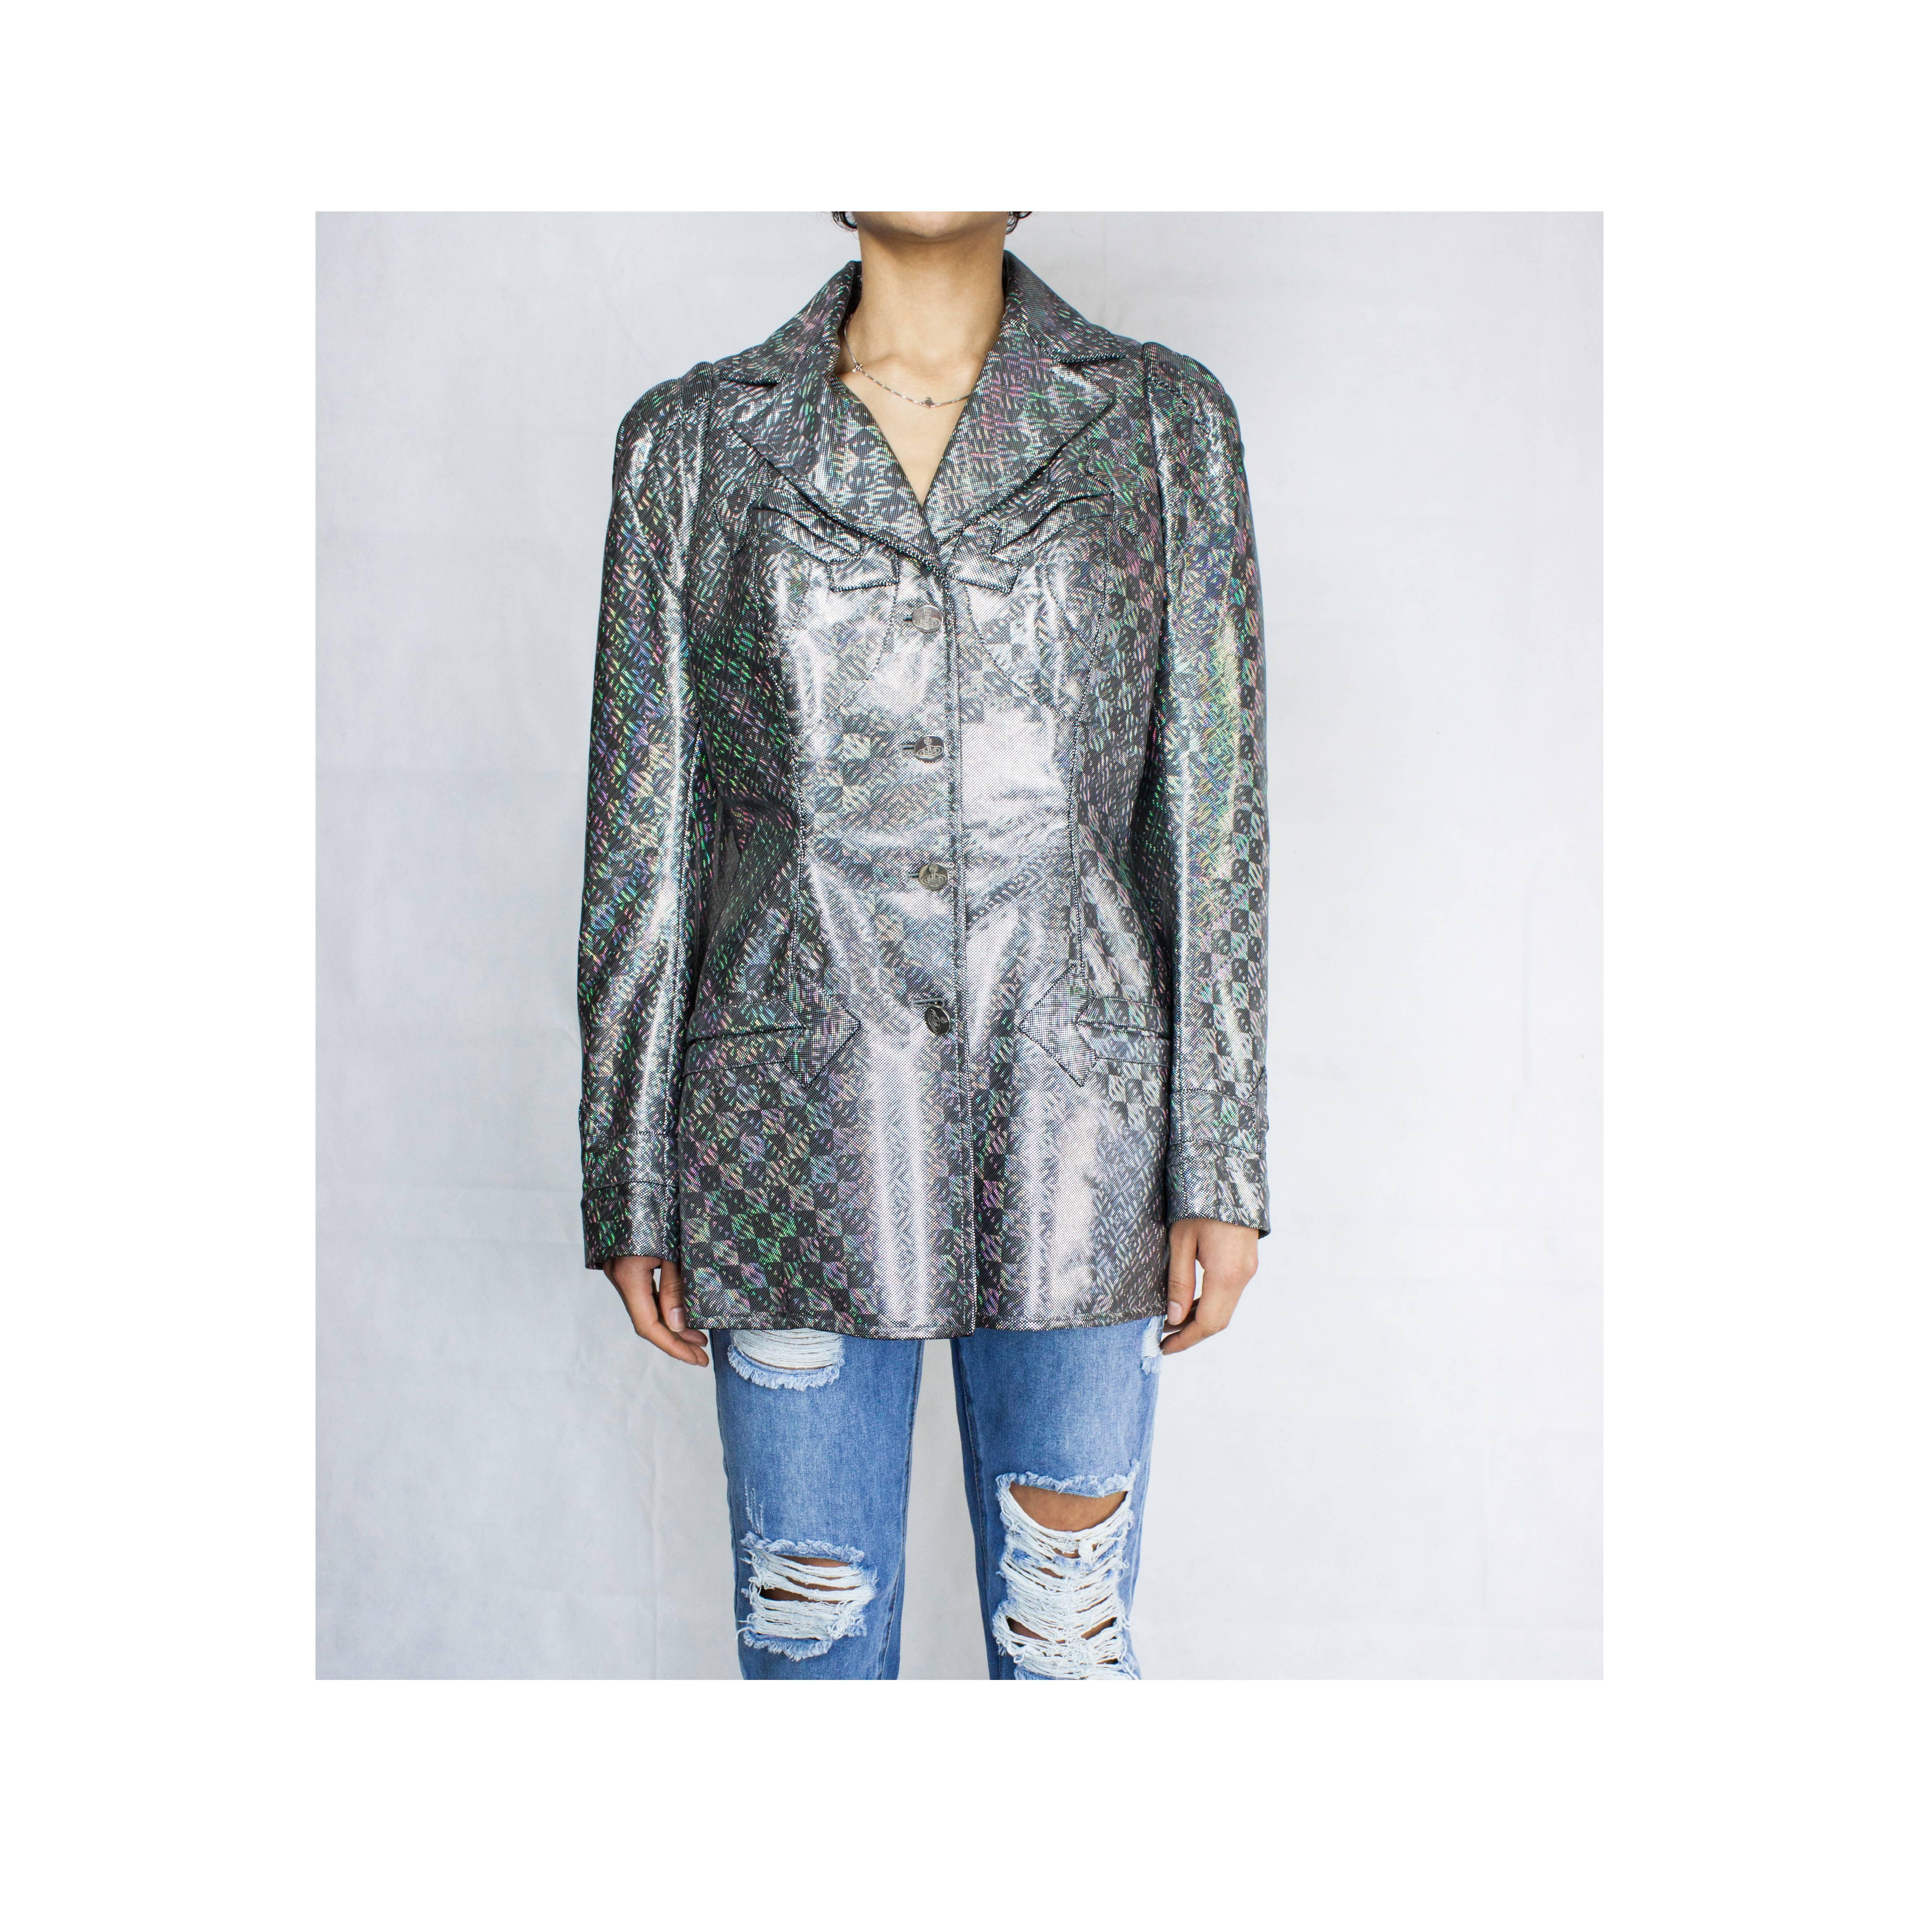 
Westwood has designed clothes outrageously flamboyant. They are beautiful, and often unconventional.

This jacket echoes early twentieth century military wear. It shows the designer’s innovative take on traditional tailoring and use of